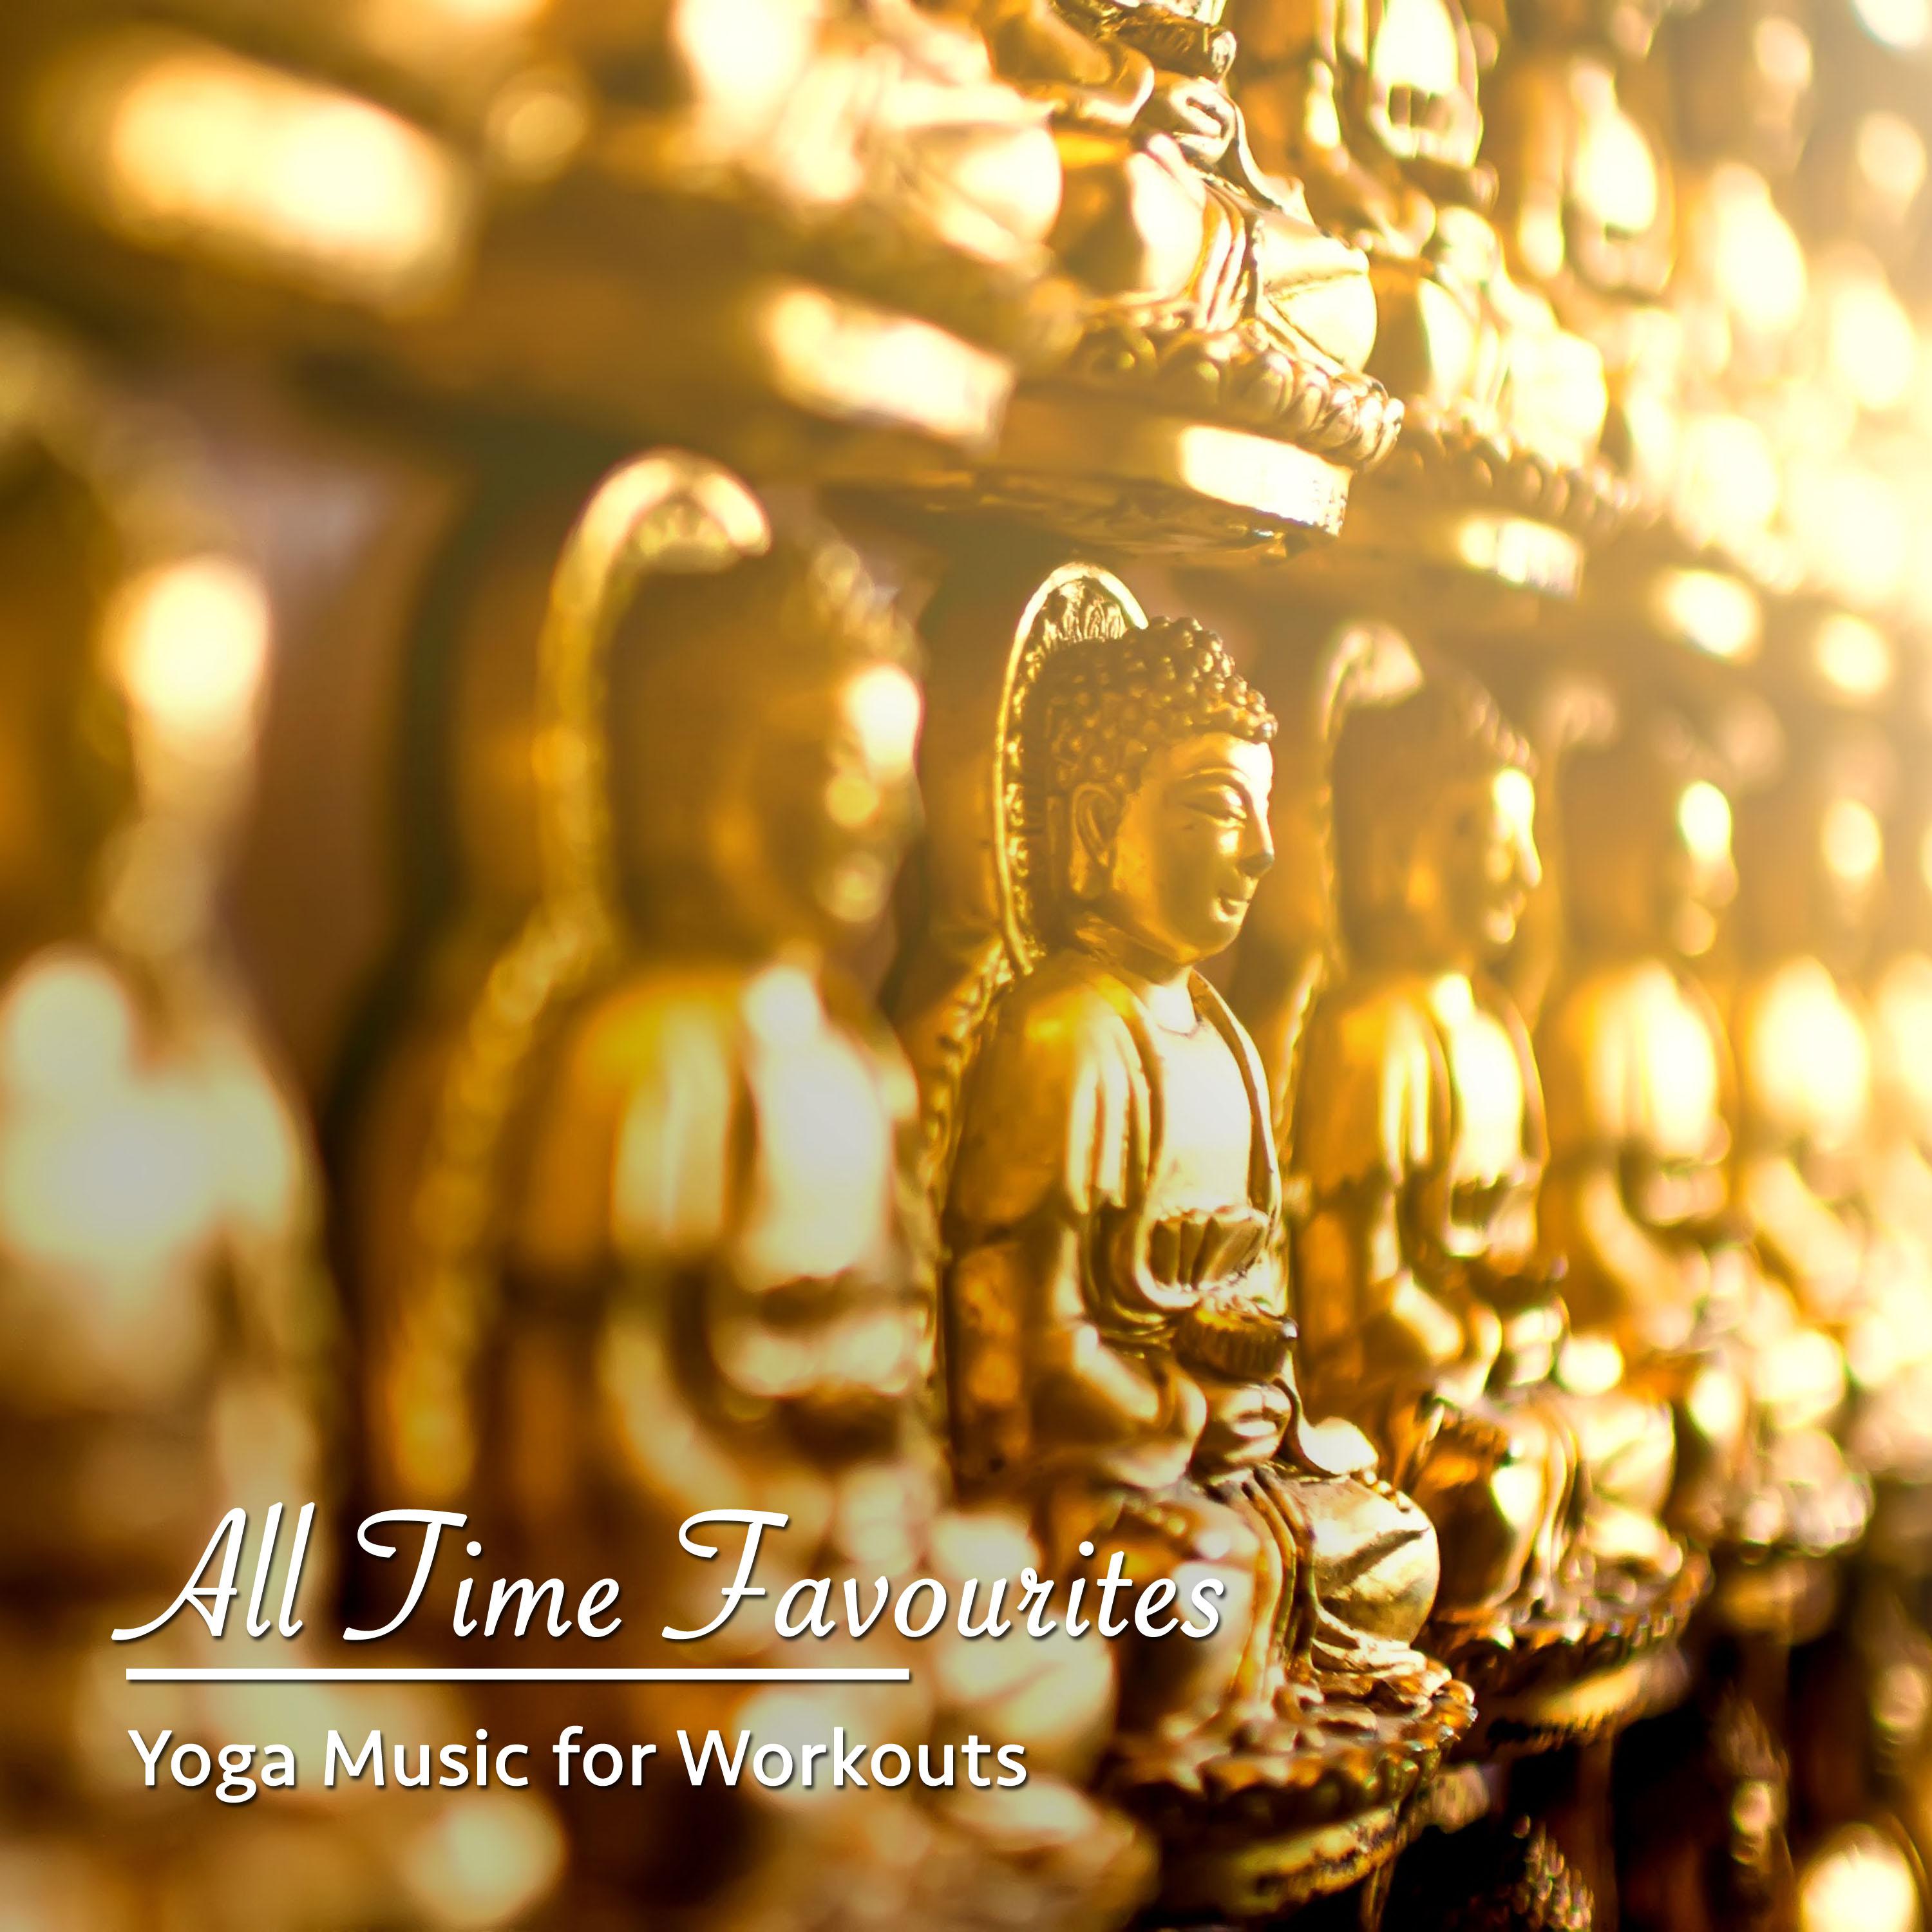 15 All Time Favourites: Yoga Music for Workouts